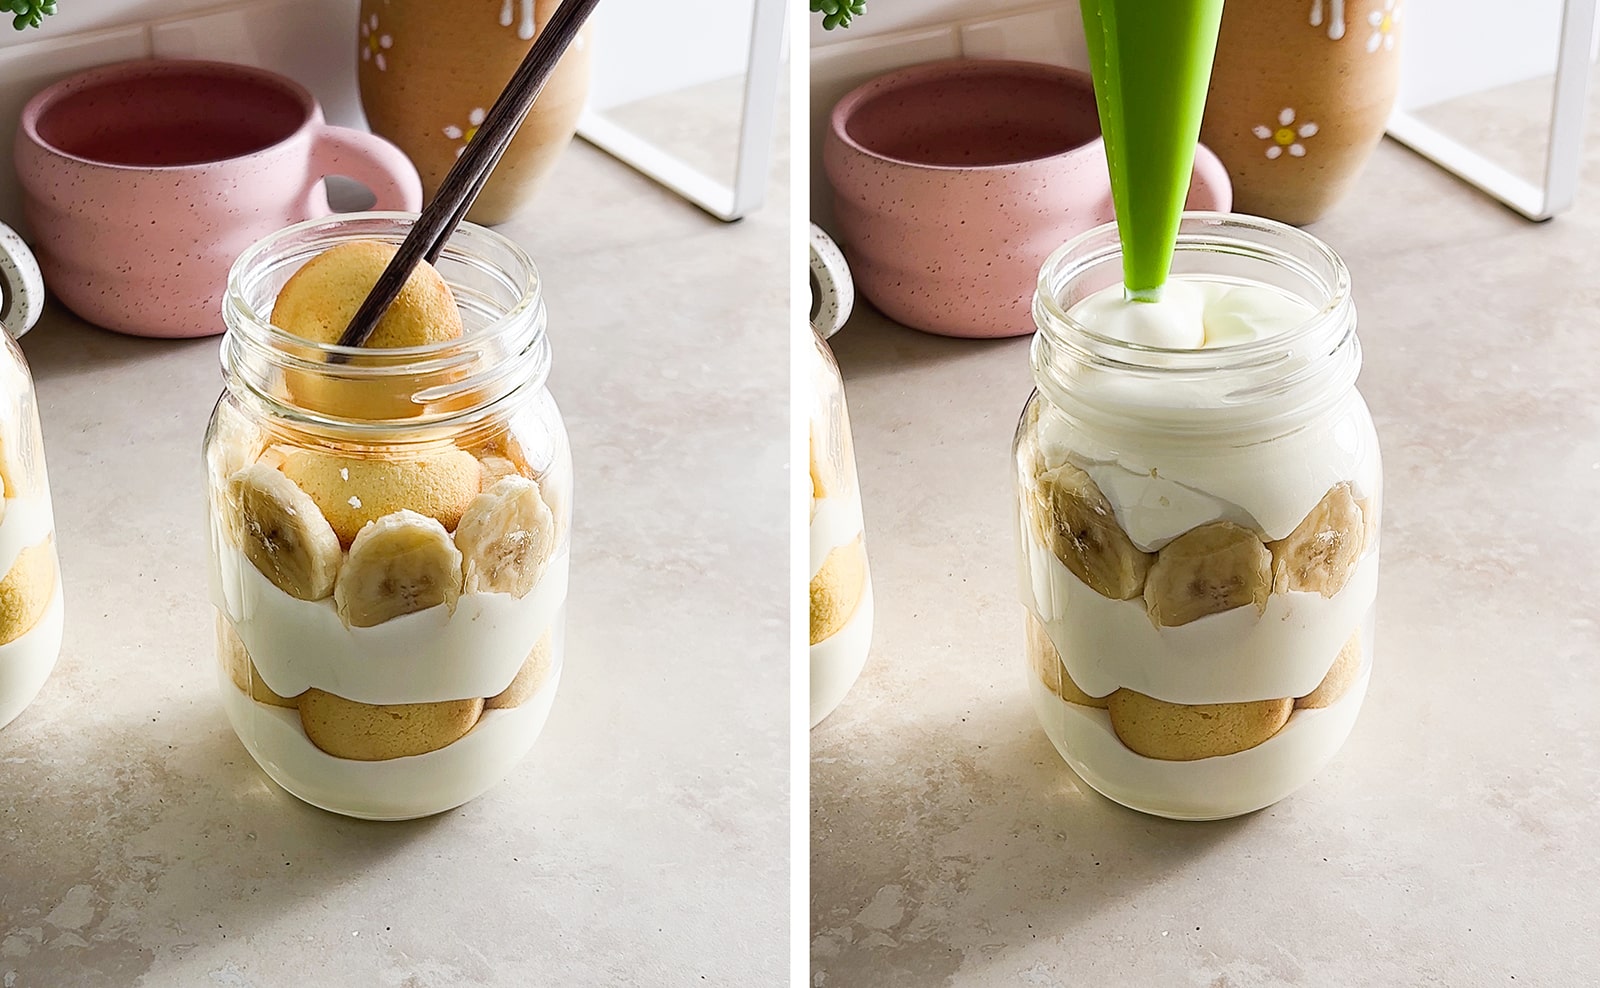 Left to right: chopsticks adding vanilla wafer to jar, piping pudding into jar.